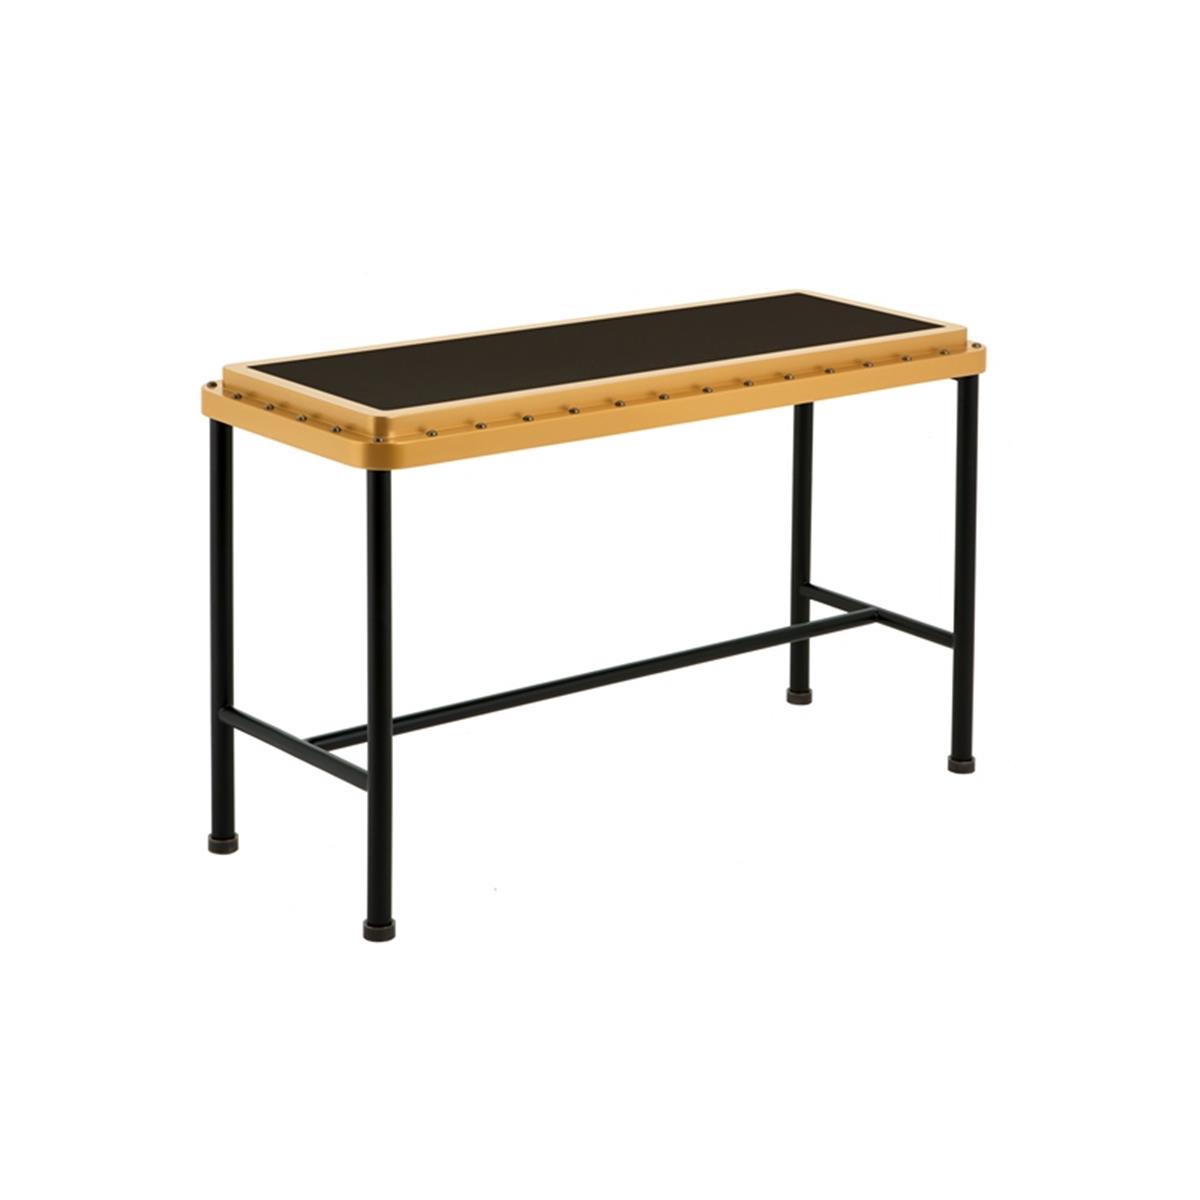 Mf166 Ace Console Table, Black & Gold